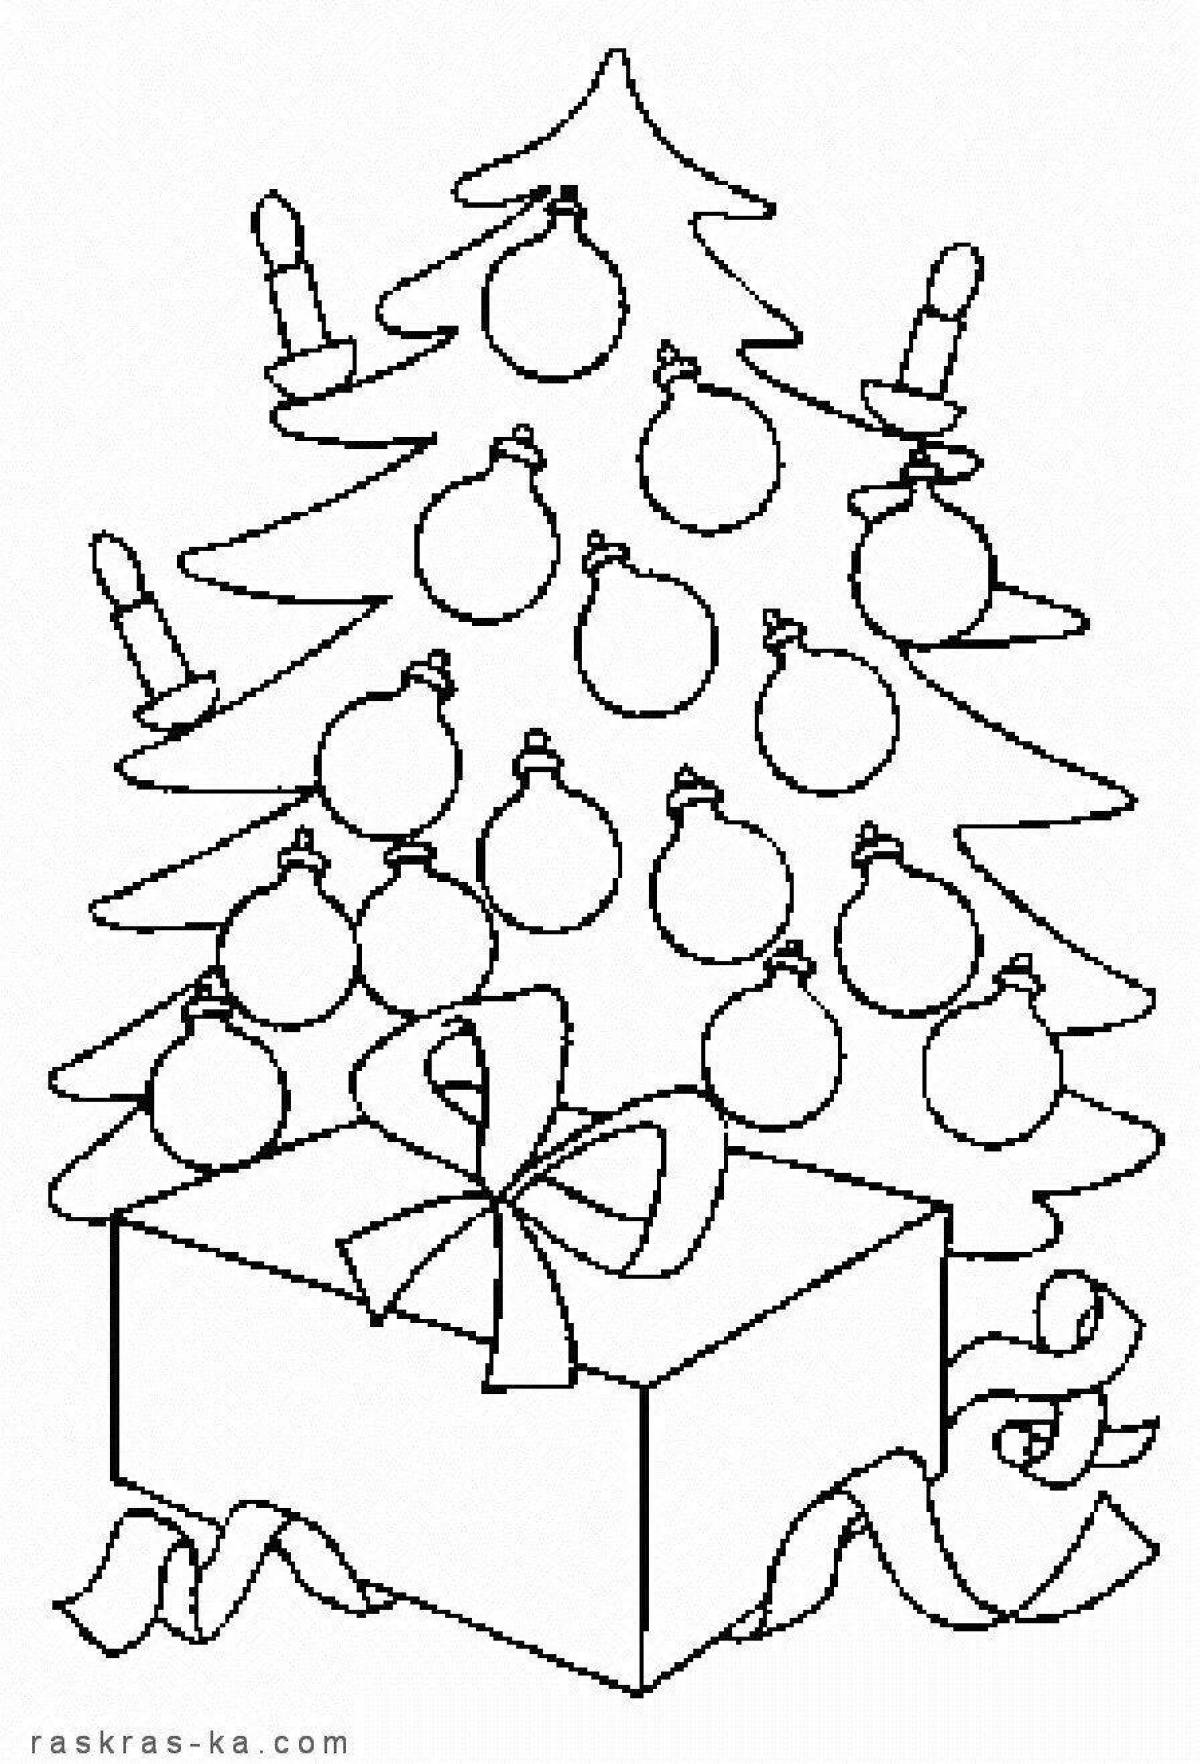 Colorful Christmas tree coloring book for children 6-7 years old